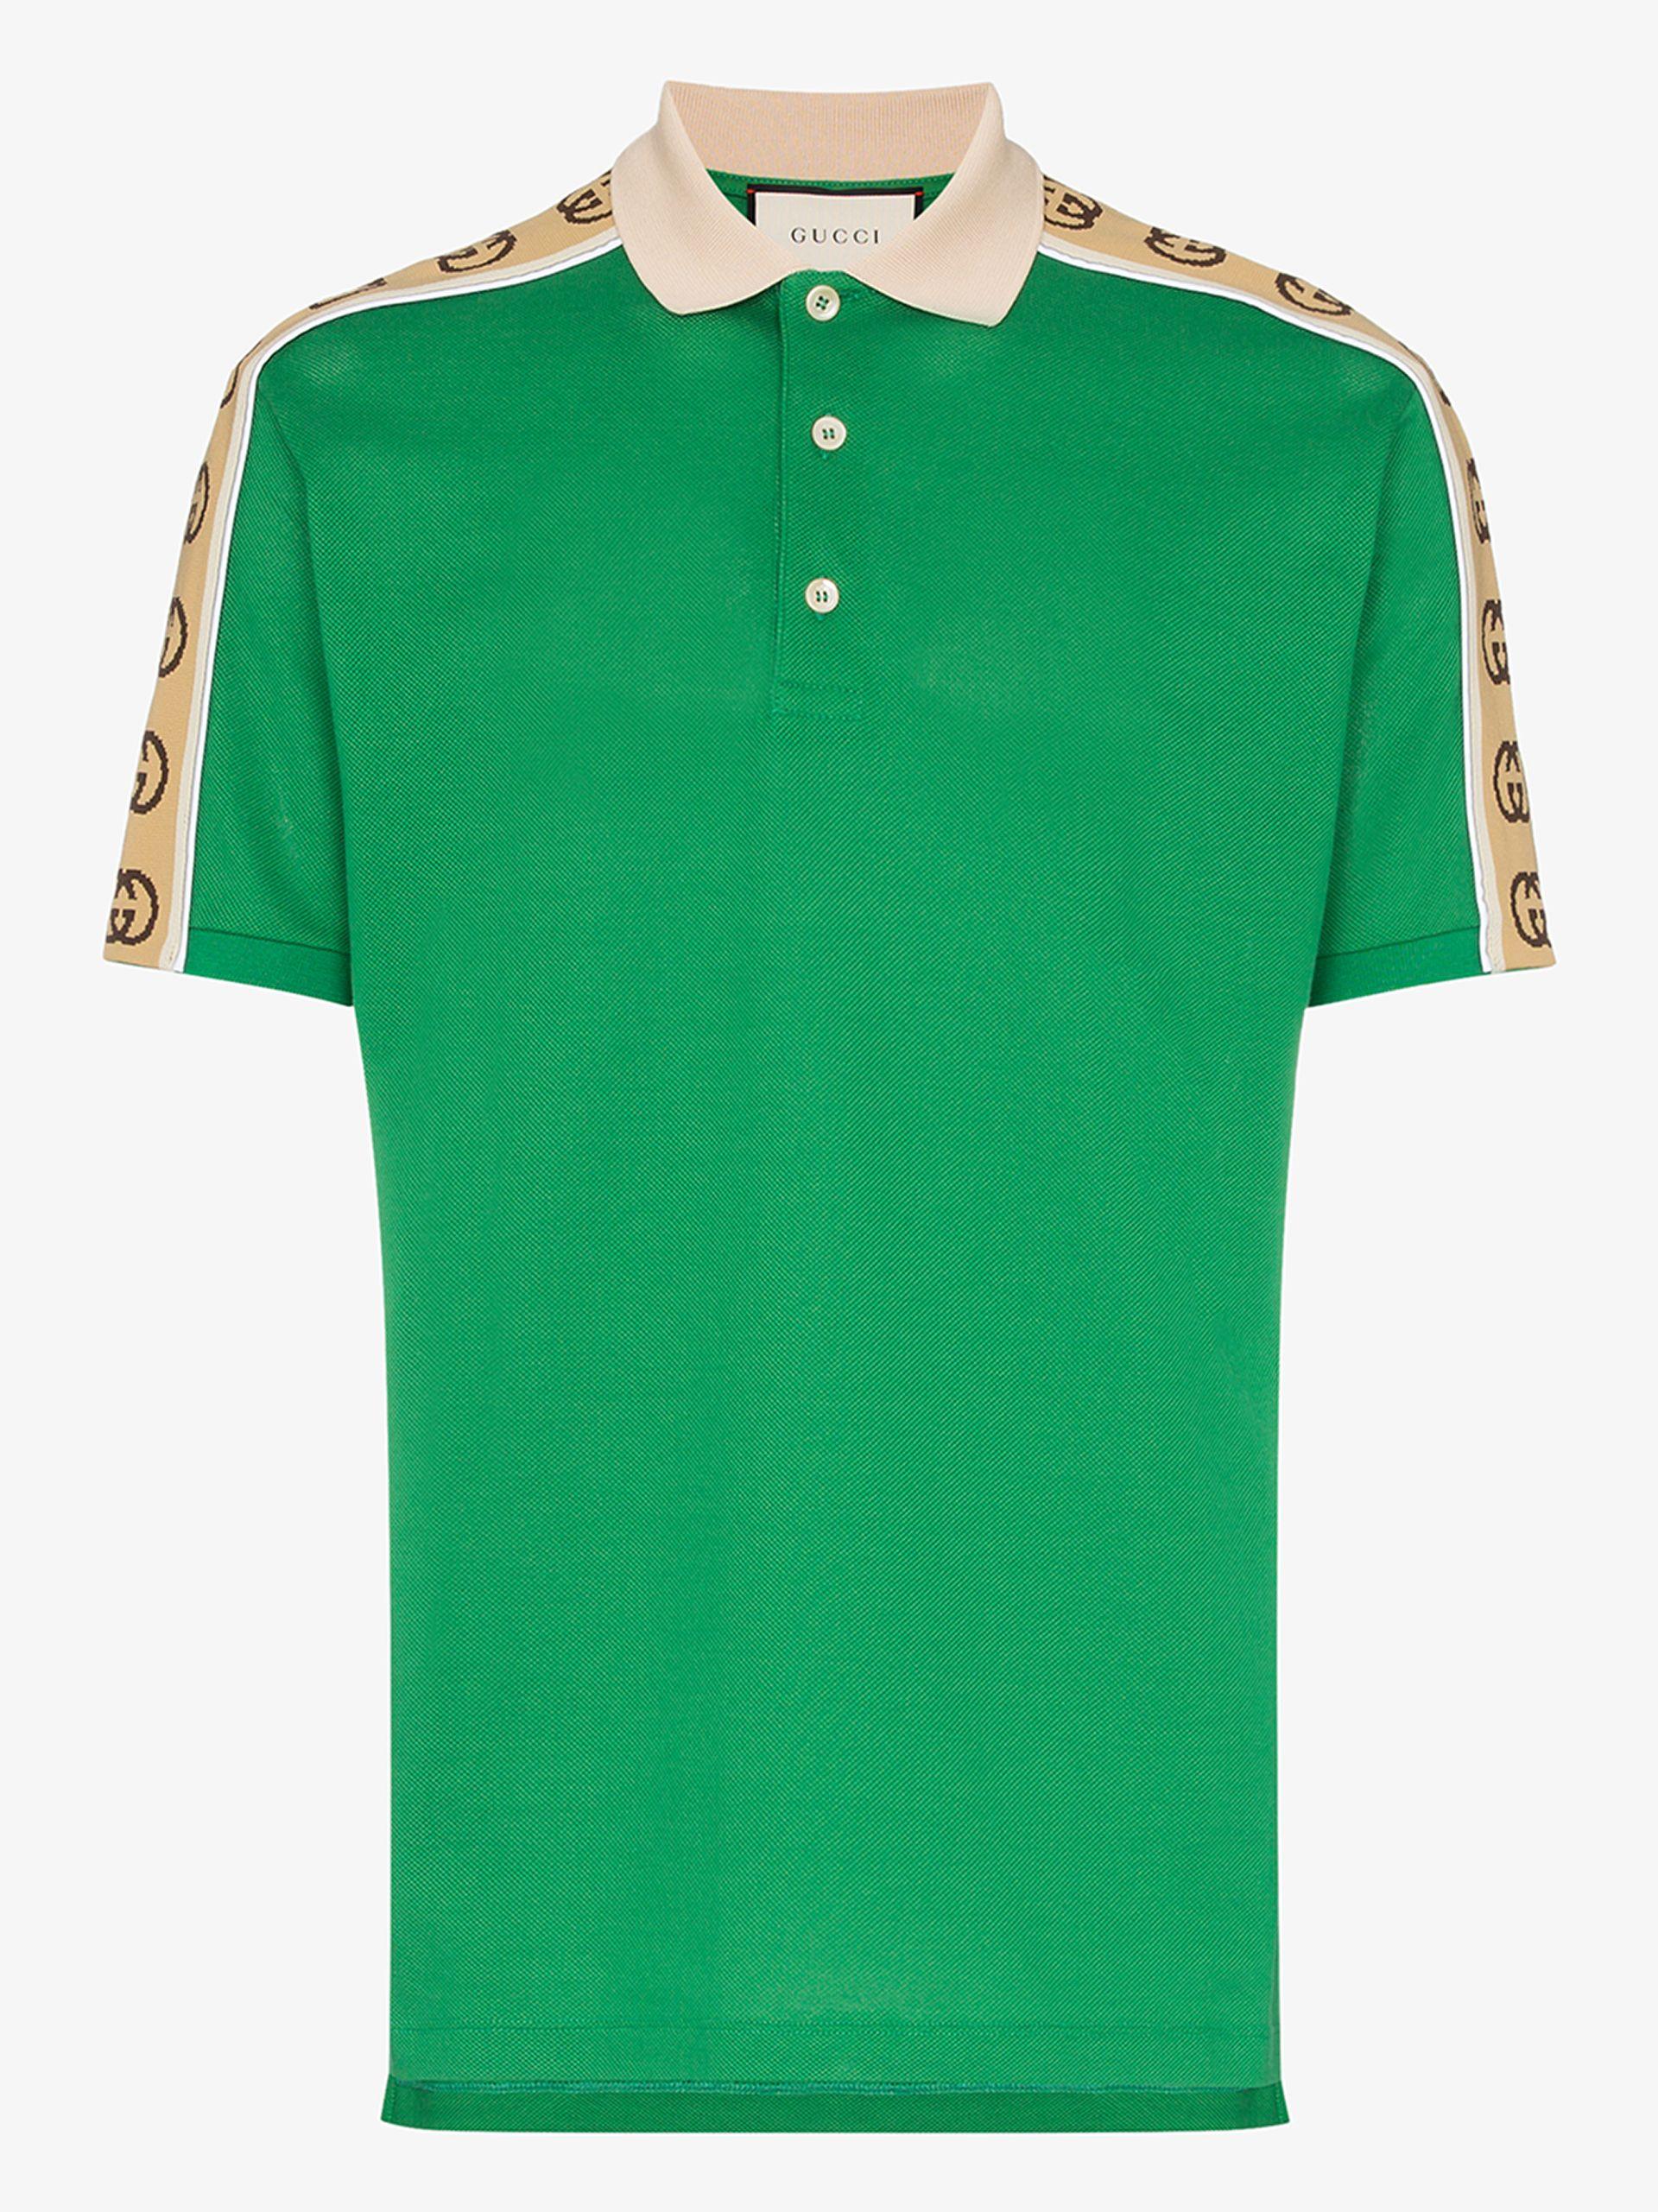 Gucci GG Polo Shirt in Green for Men -